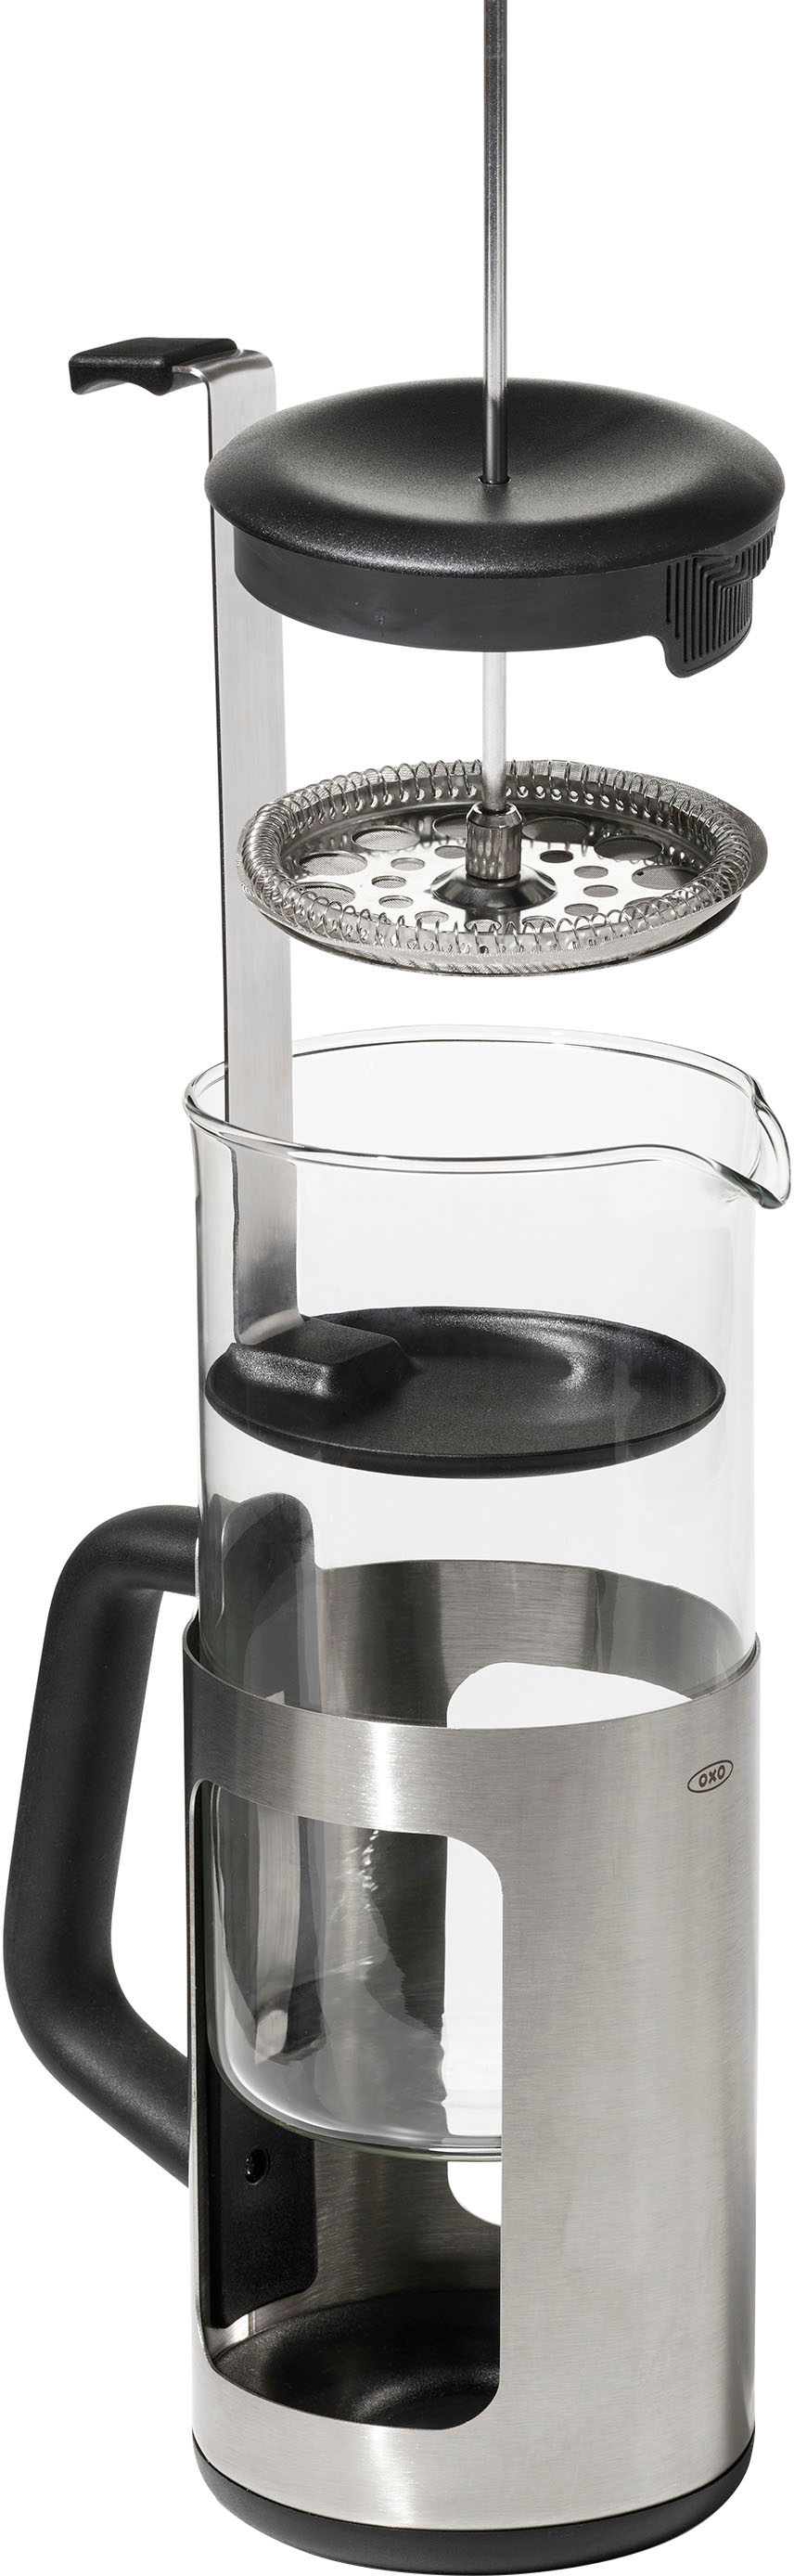 Best Buy: Brim 8-Cup French Press Coffee Maker Stainless Steel 50023